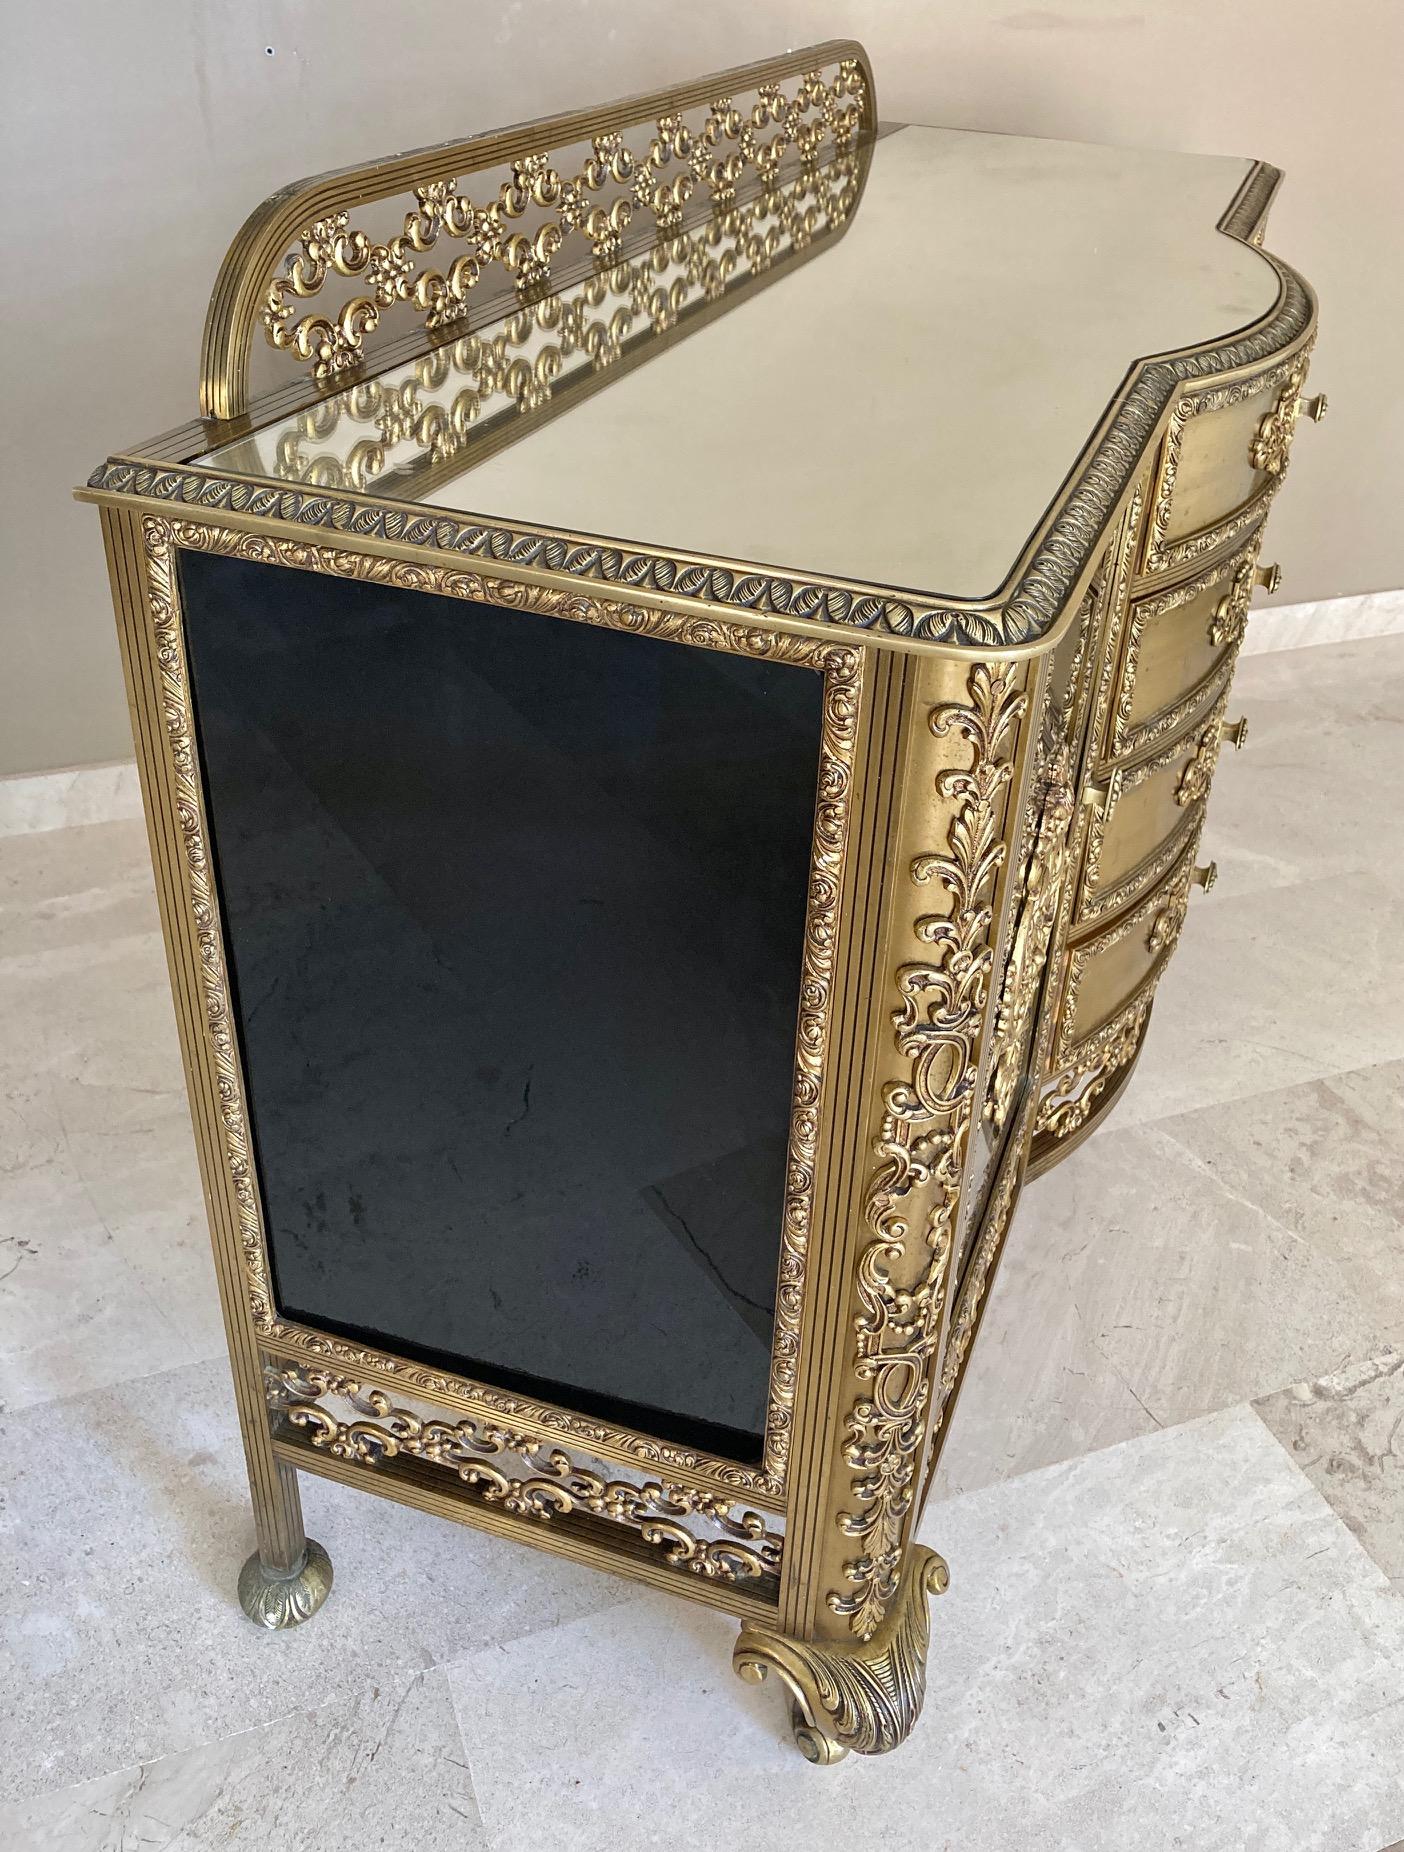 19th Century French Bronze Kidney Mirrored Dressing Table or Vanity with Four Drawers and Two